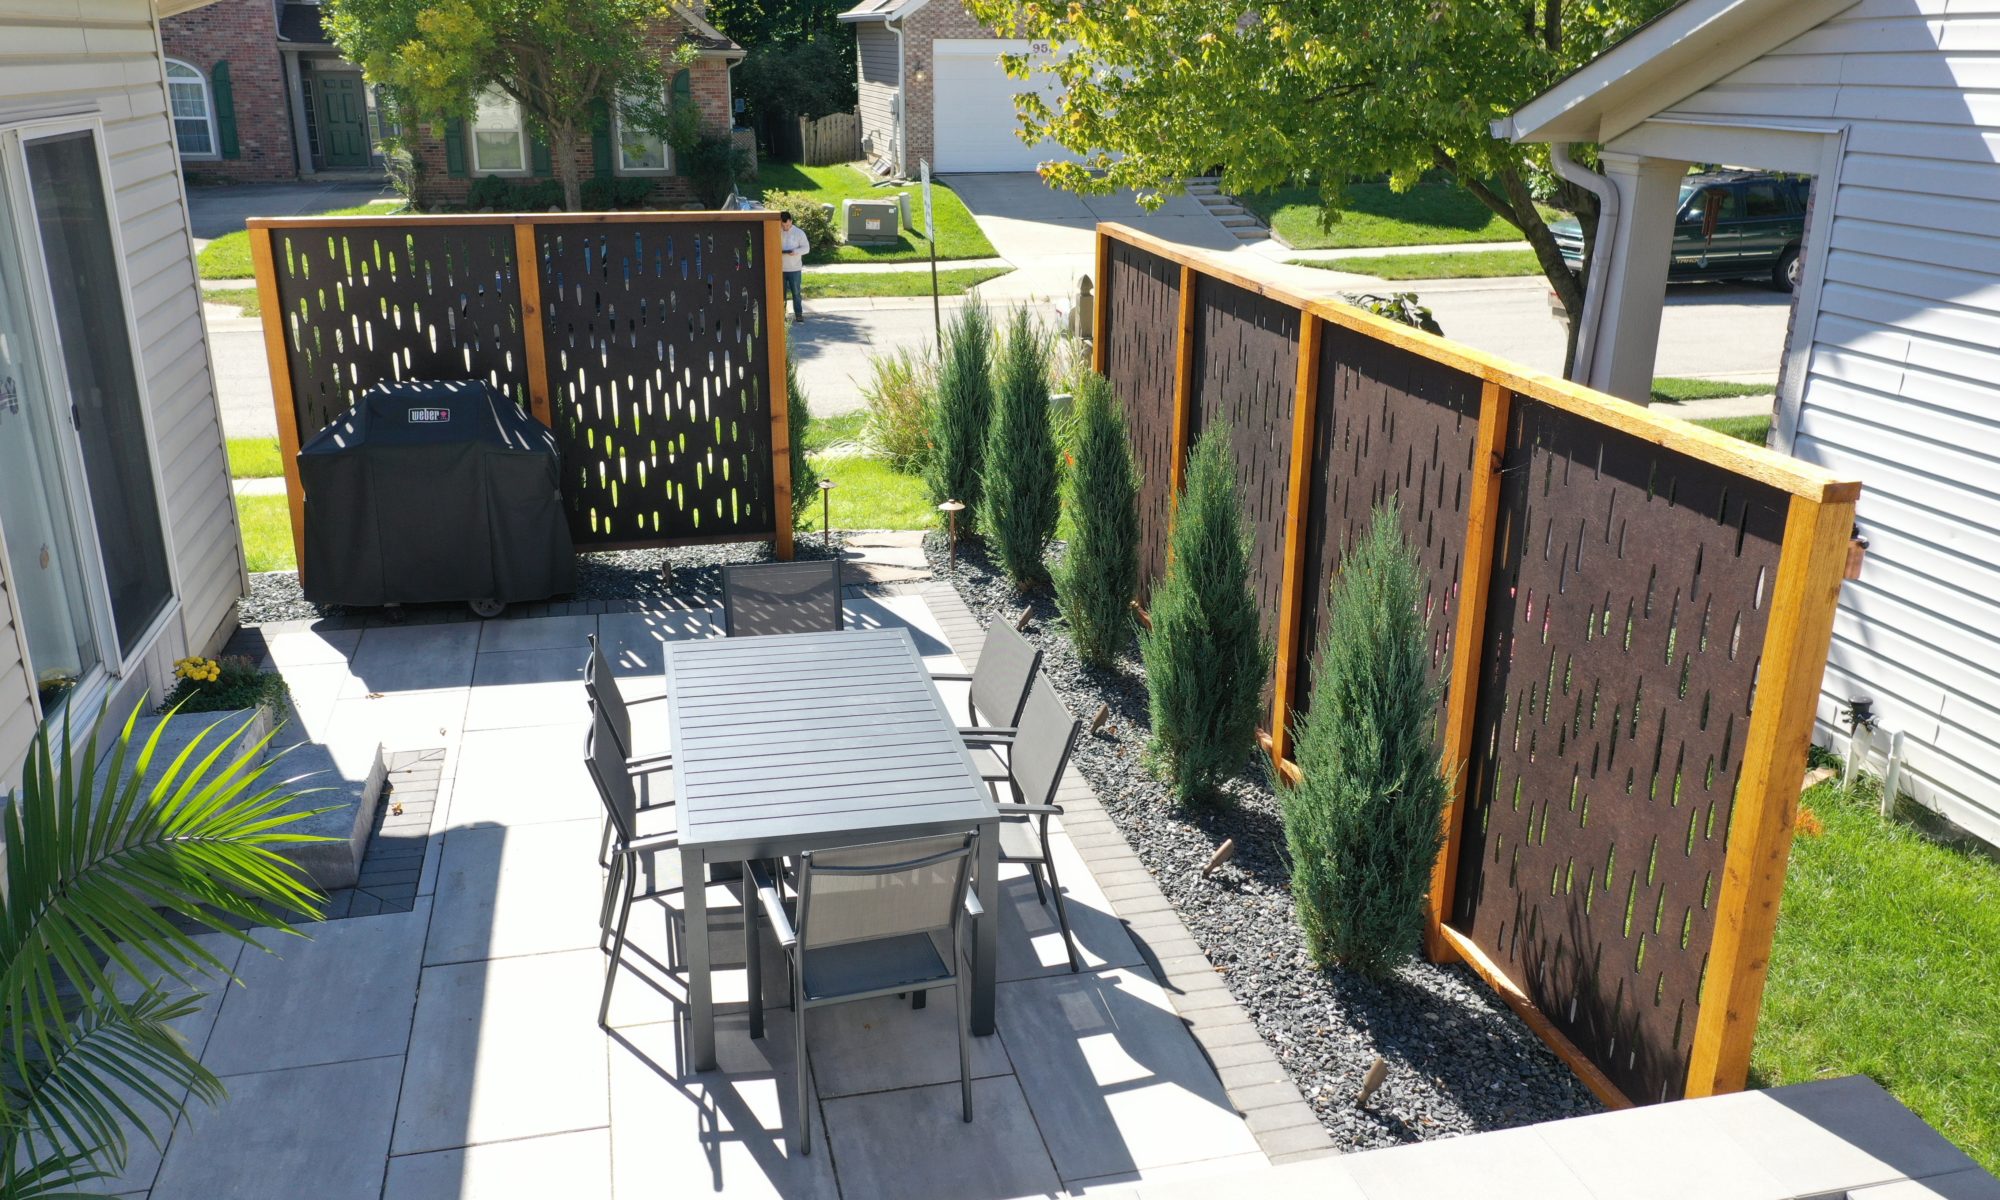 The Private Plaza privacy screens custom landscaping fire pit arborvitae private dining privacy Carmel indiana landscaping walkway